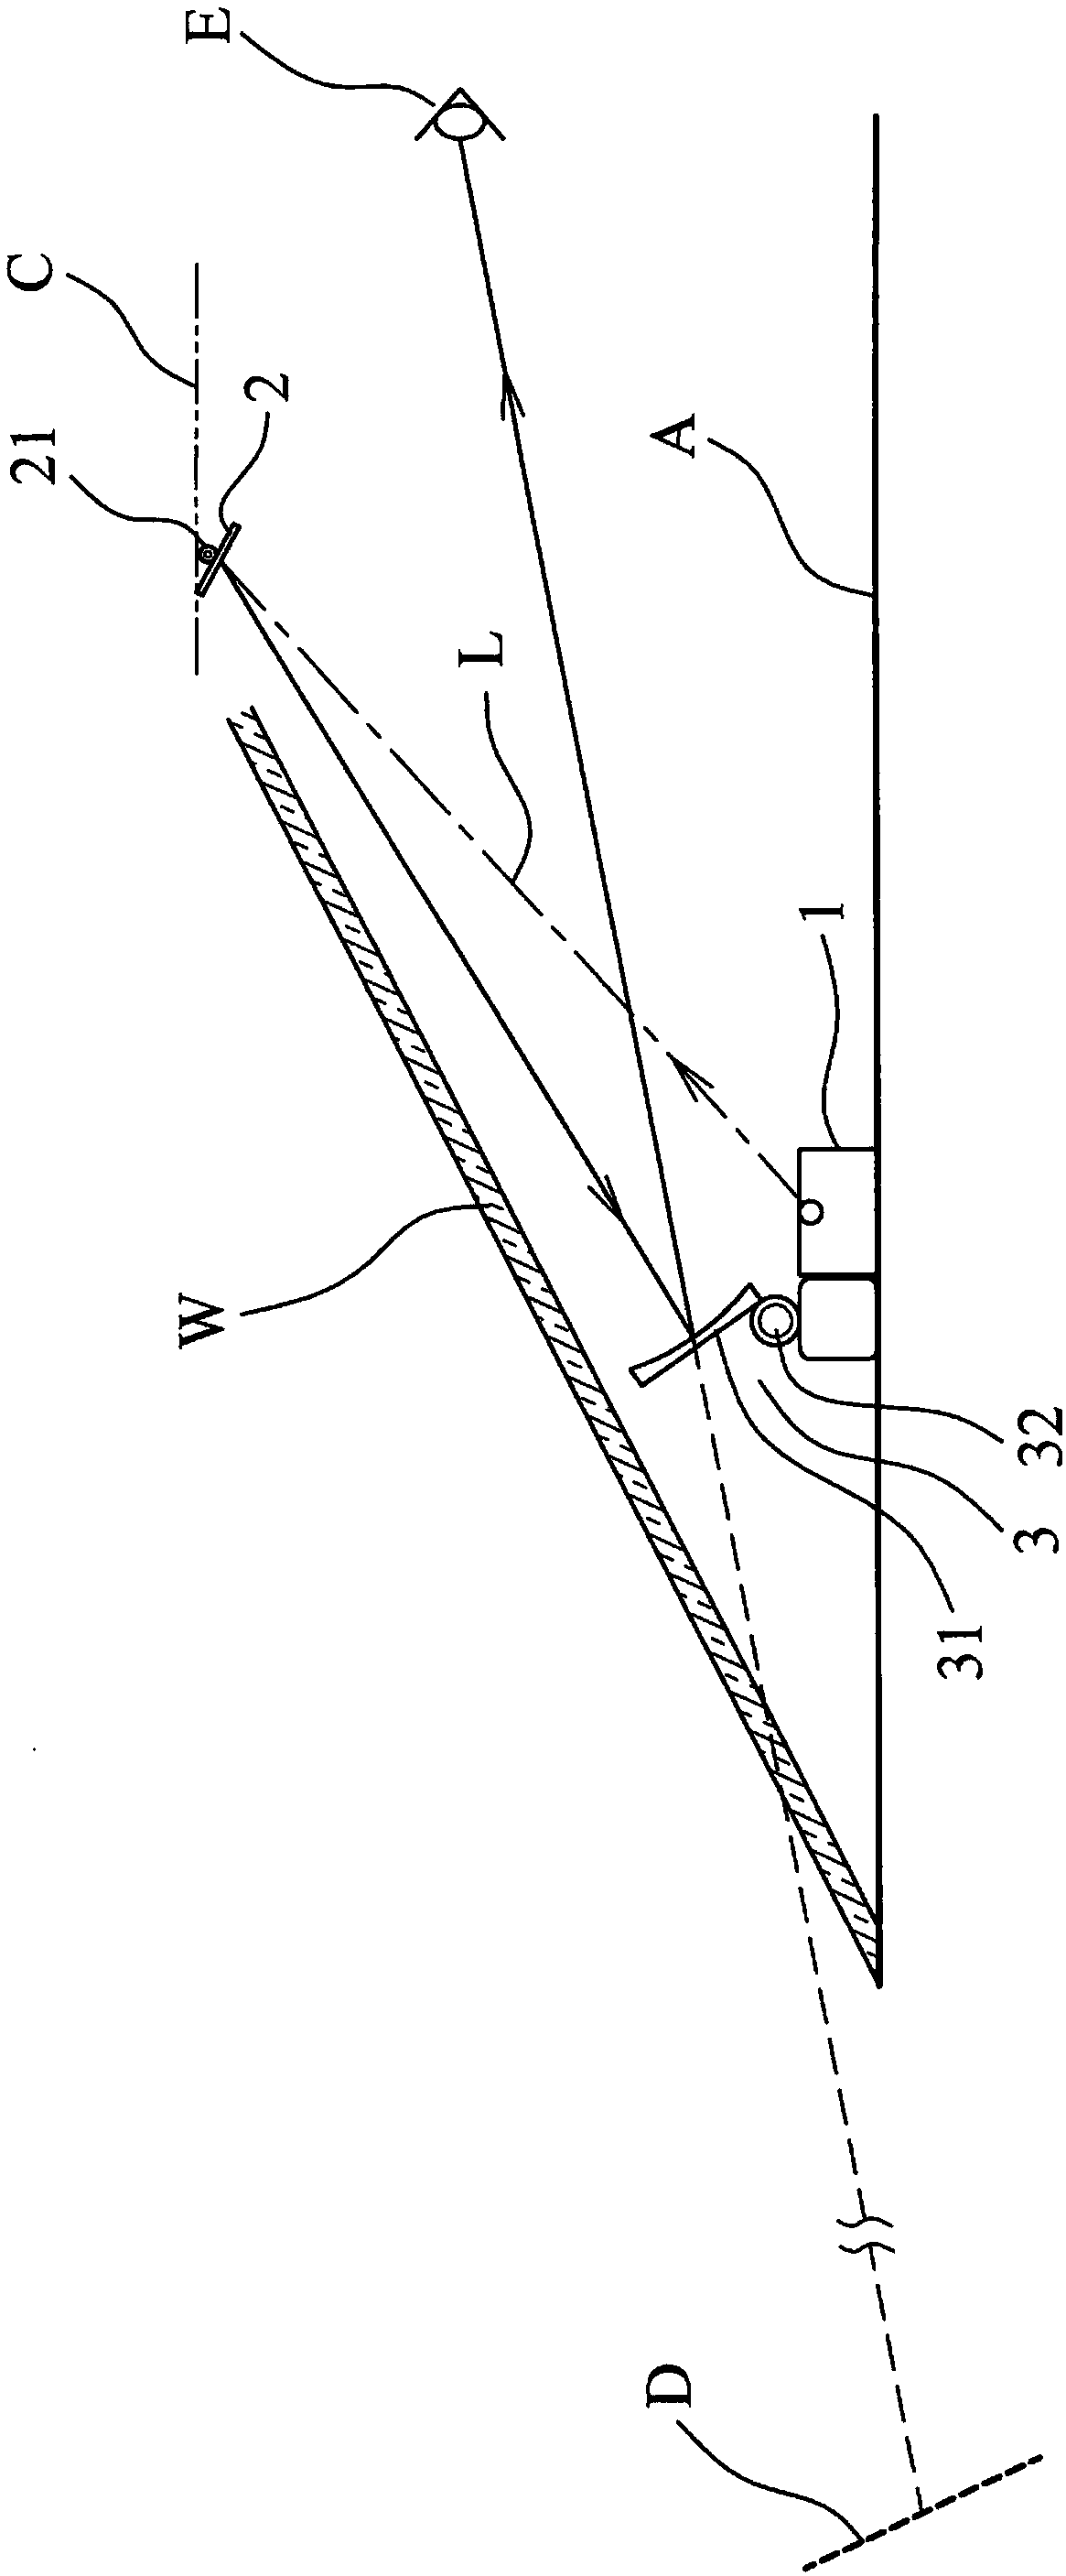 Head-up display device for remote image displaying